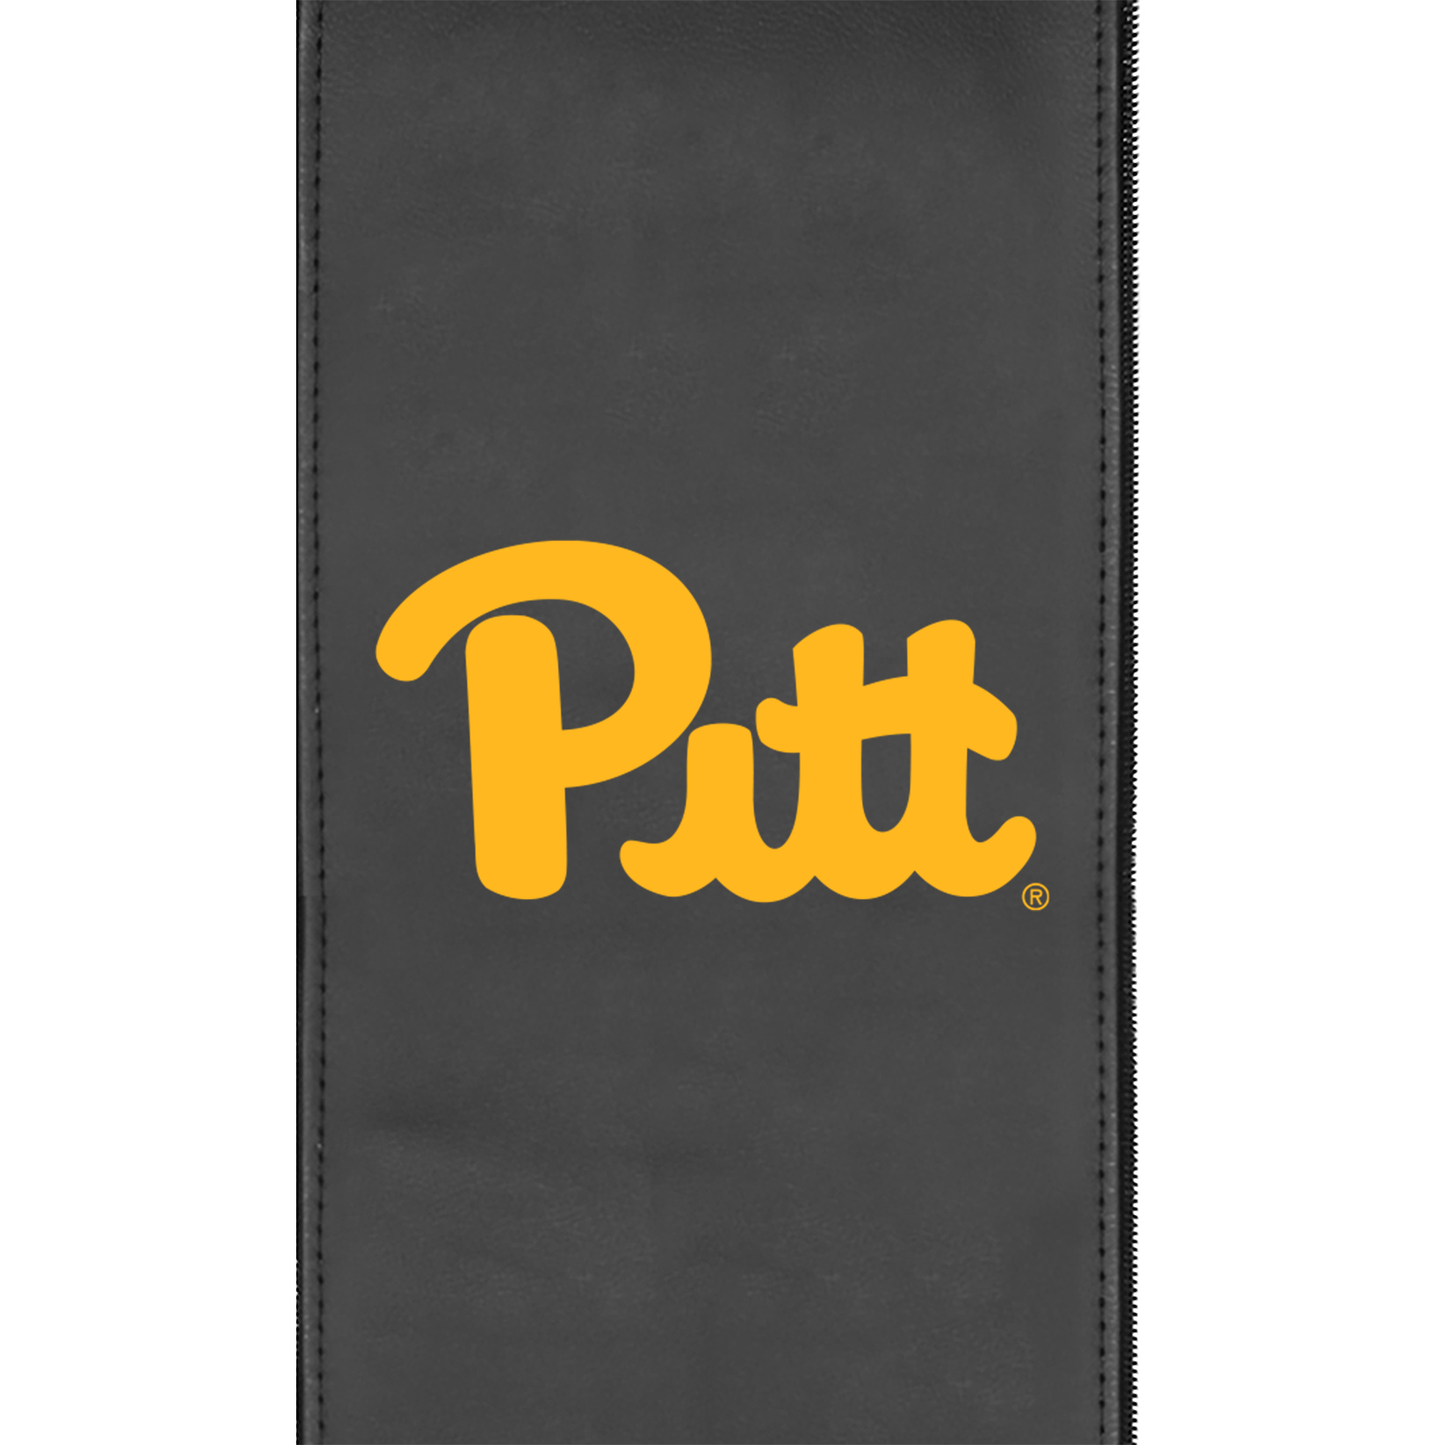 Swivel Bar Stool 2000 with Pittsburgh Panthers Secondary Logo